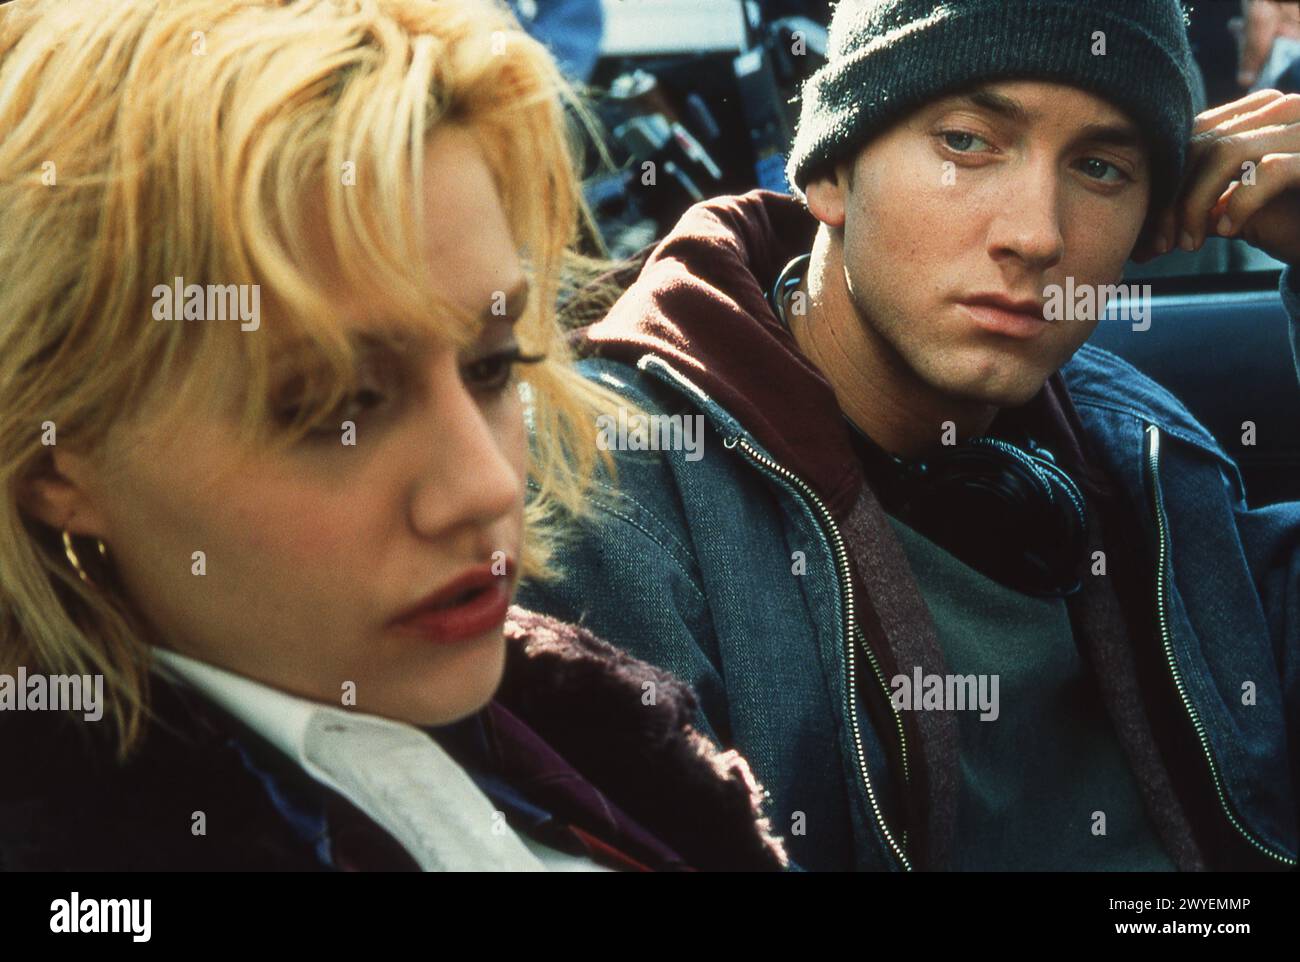 BRITTANY MURPHY and EMINEM in 8 MILE 2002 director CURTIS HANSON writer Scott Silver costume design Mark Bridges Imagine Entertainment / Interscope Films / Mikona Productions GmbH & Co. KG / Universal Pictures Stock Photo